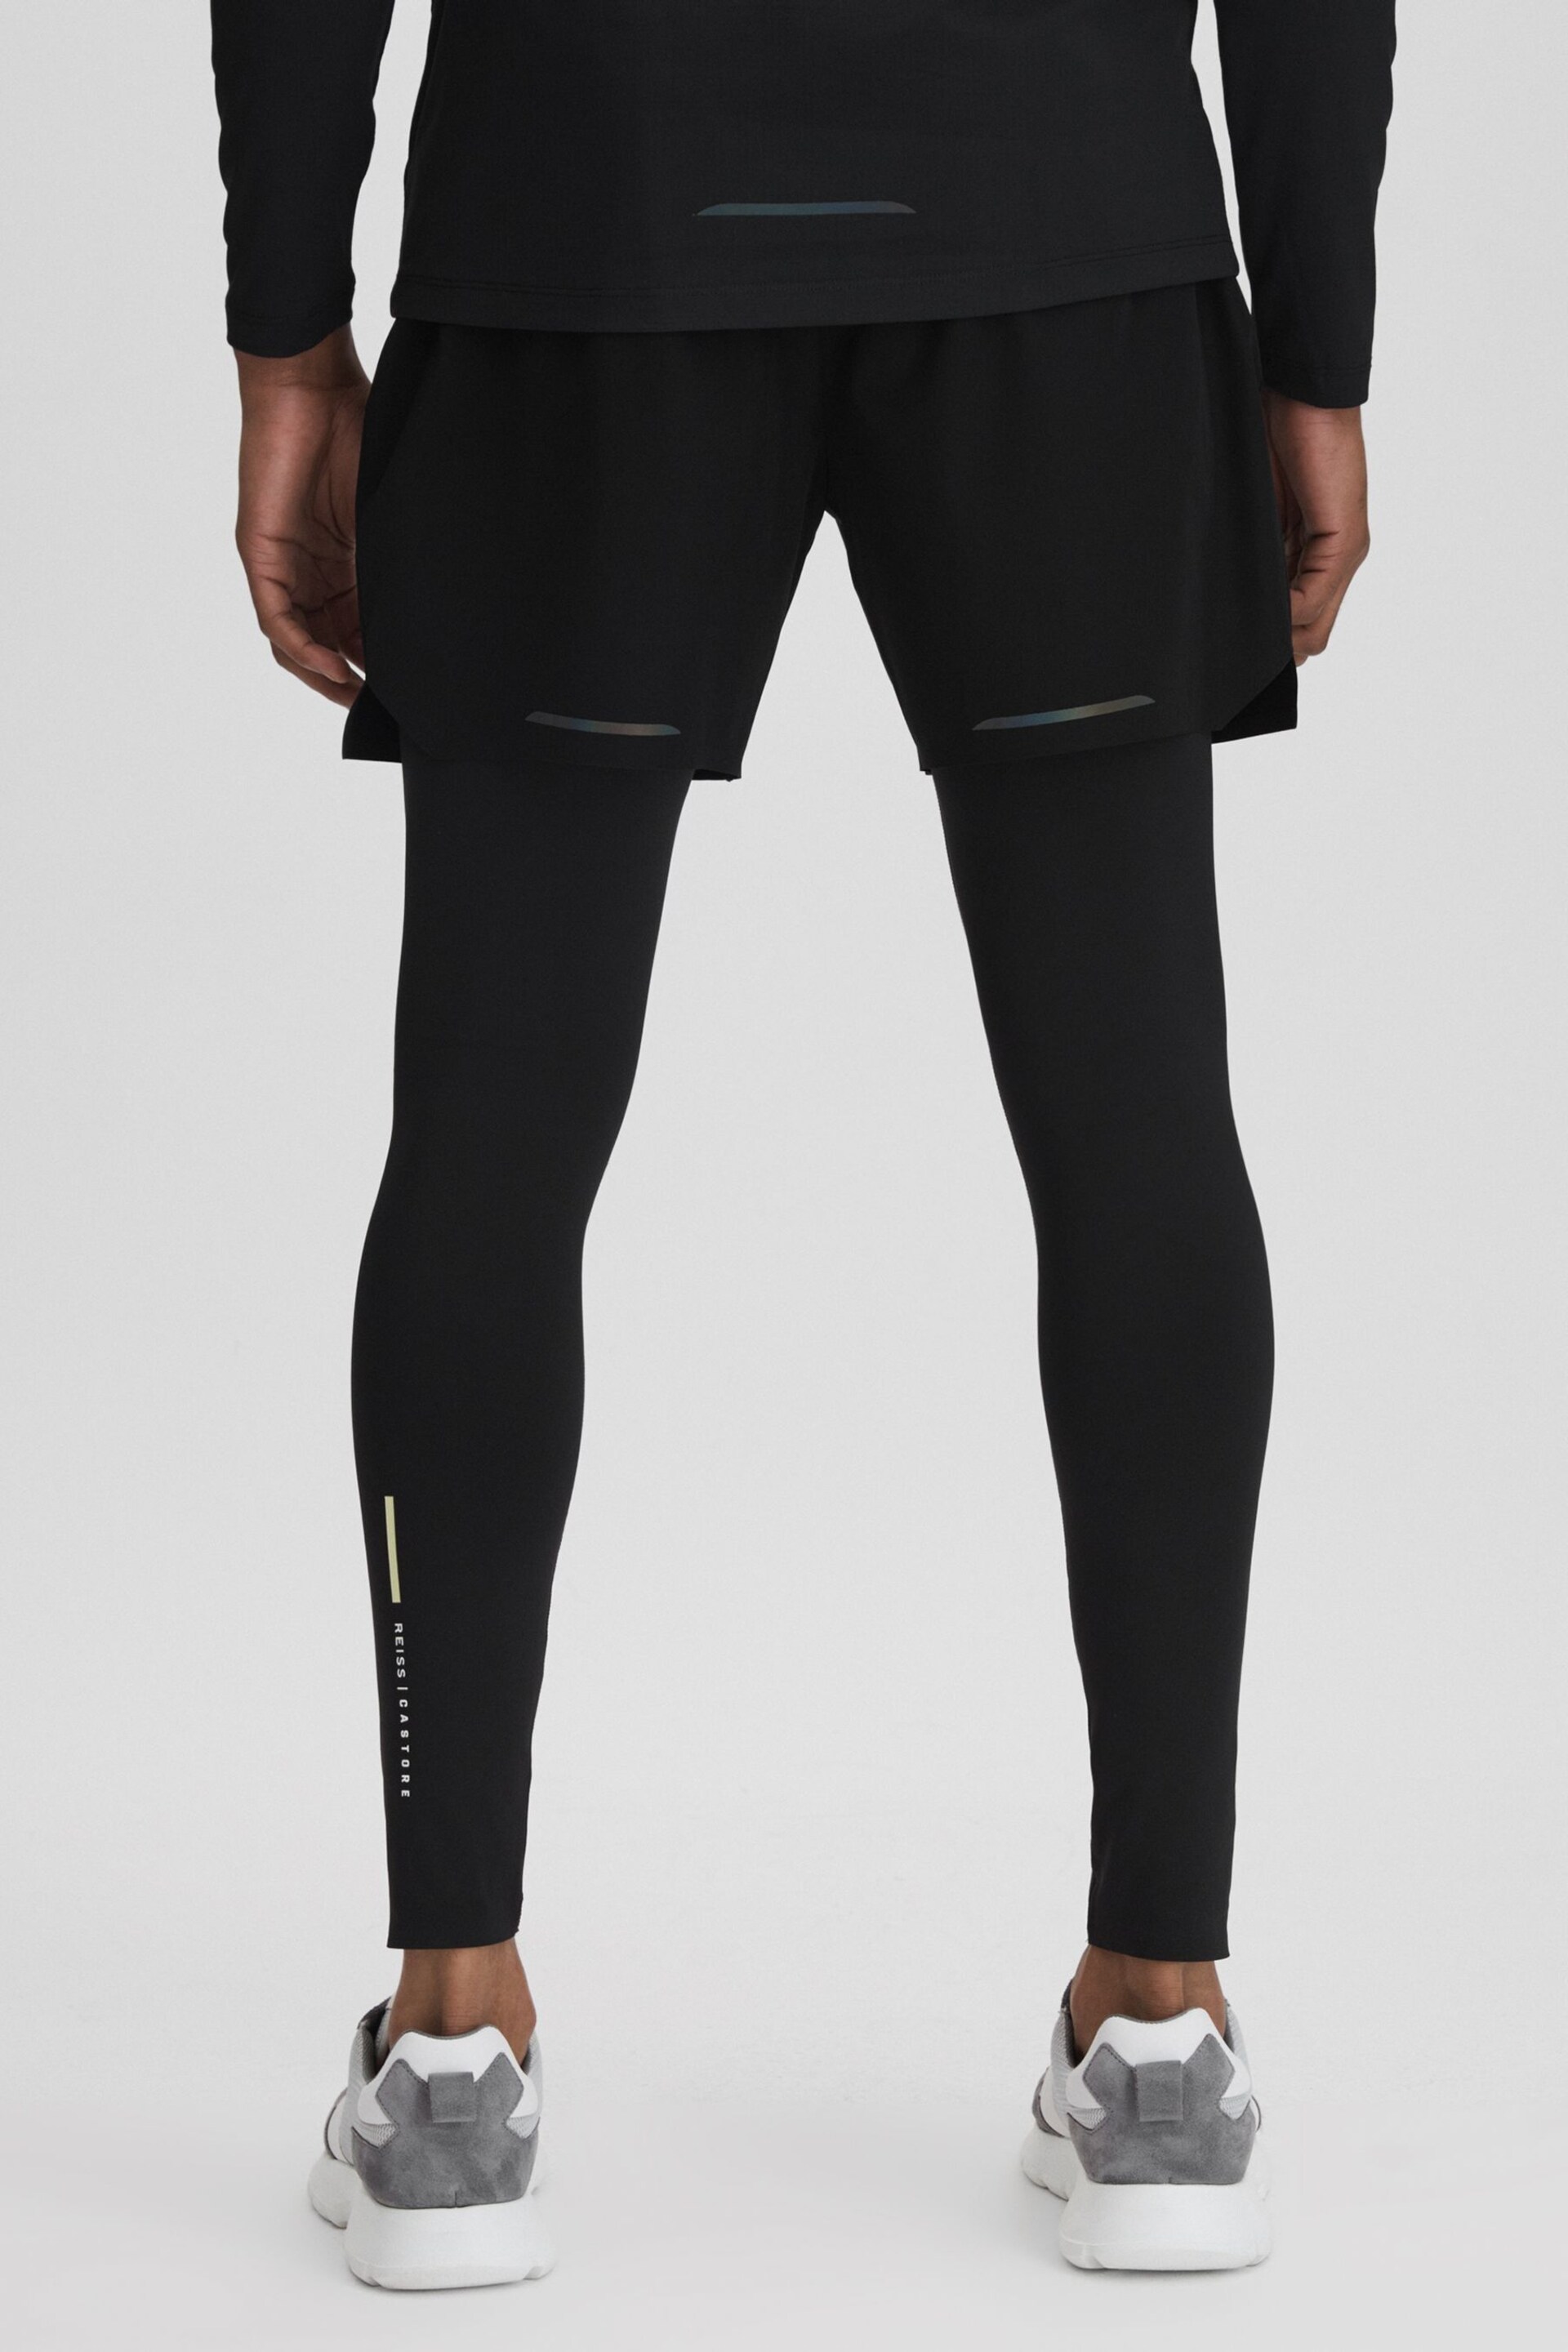 Reiss Onyx Black Holt Castore Performance Tights - Image 5 of 8